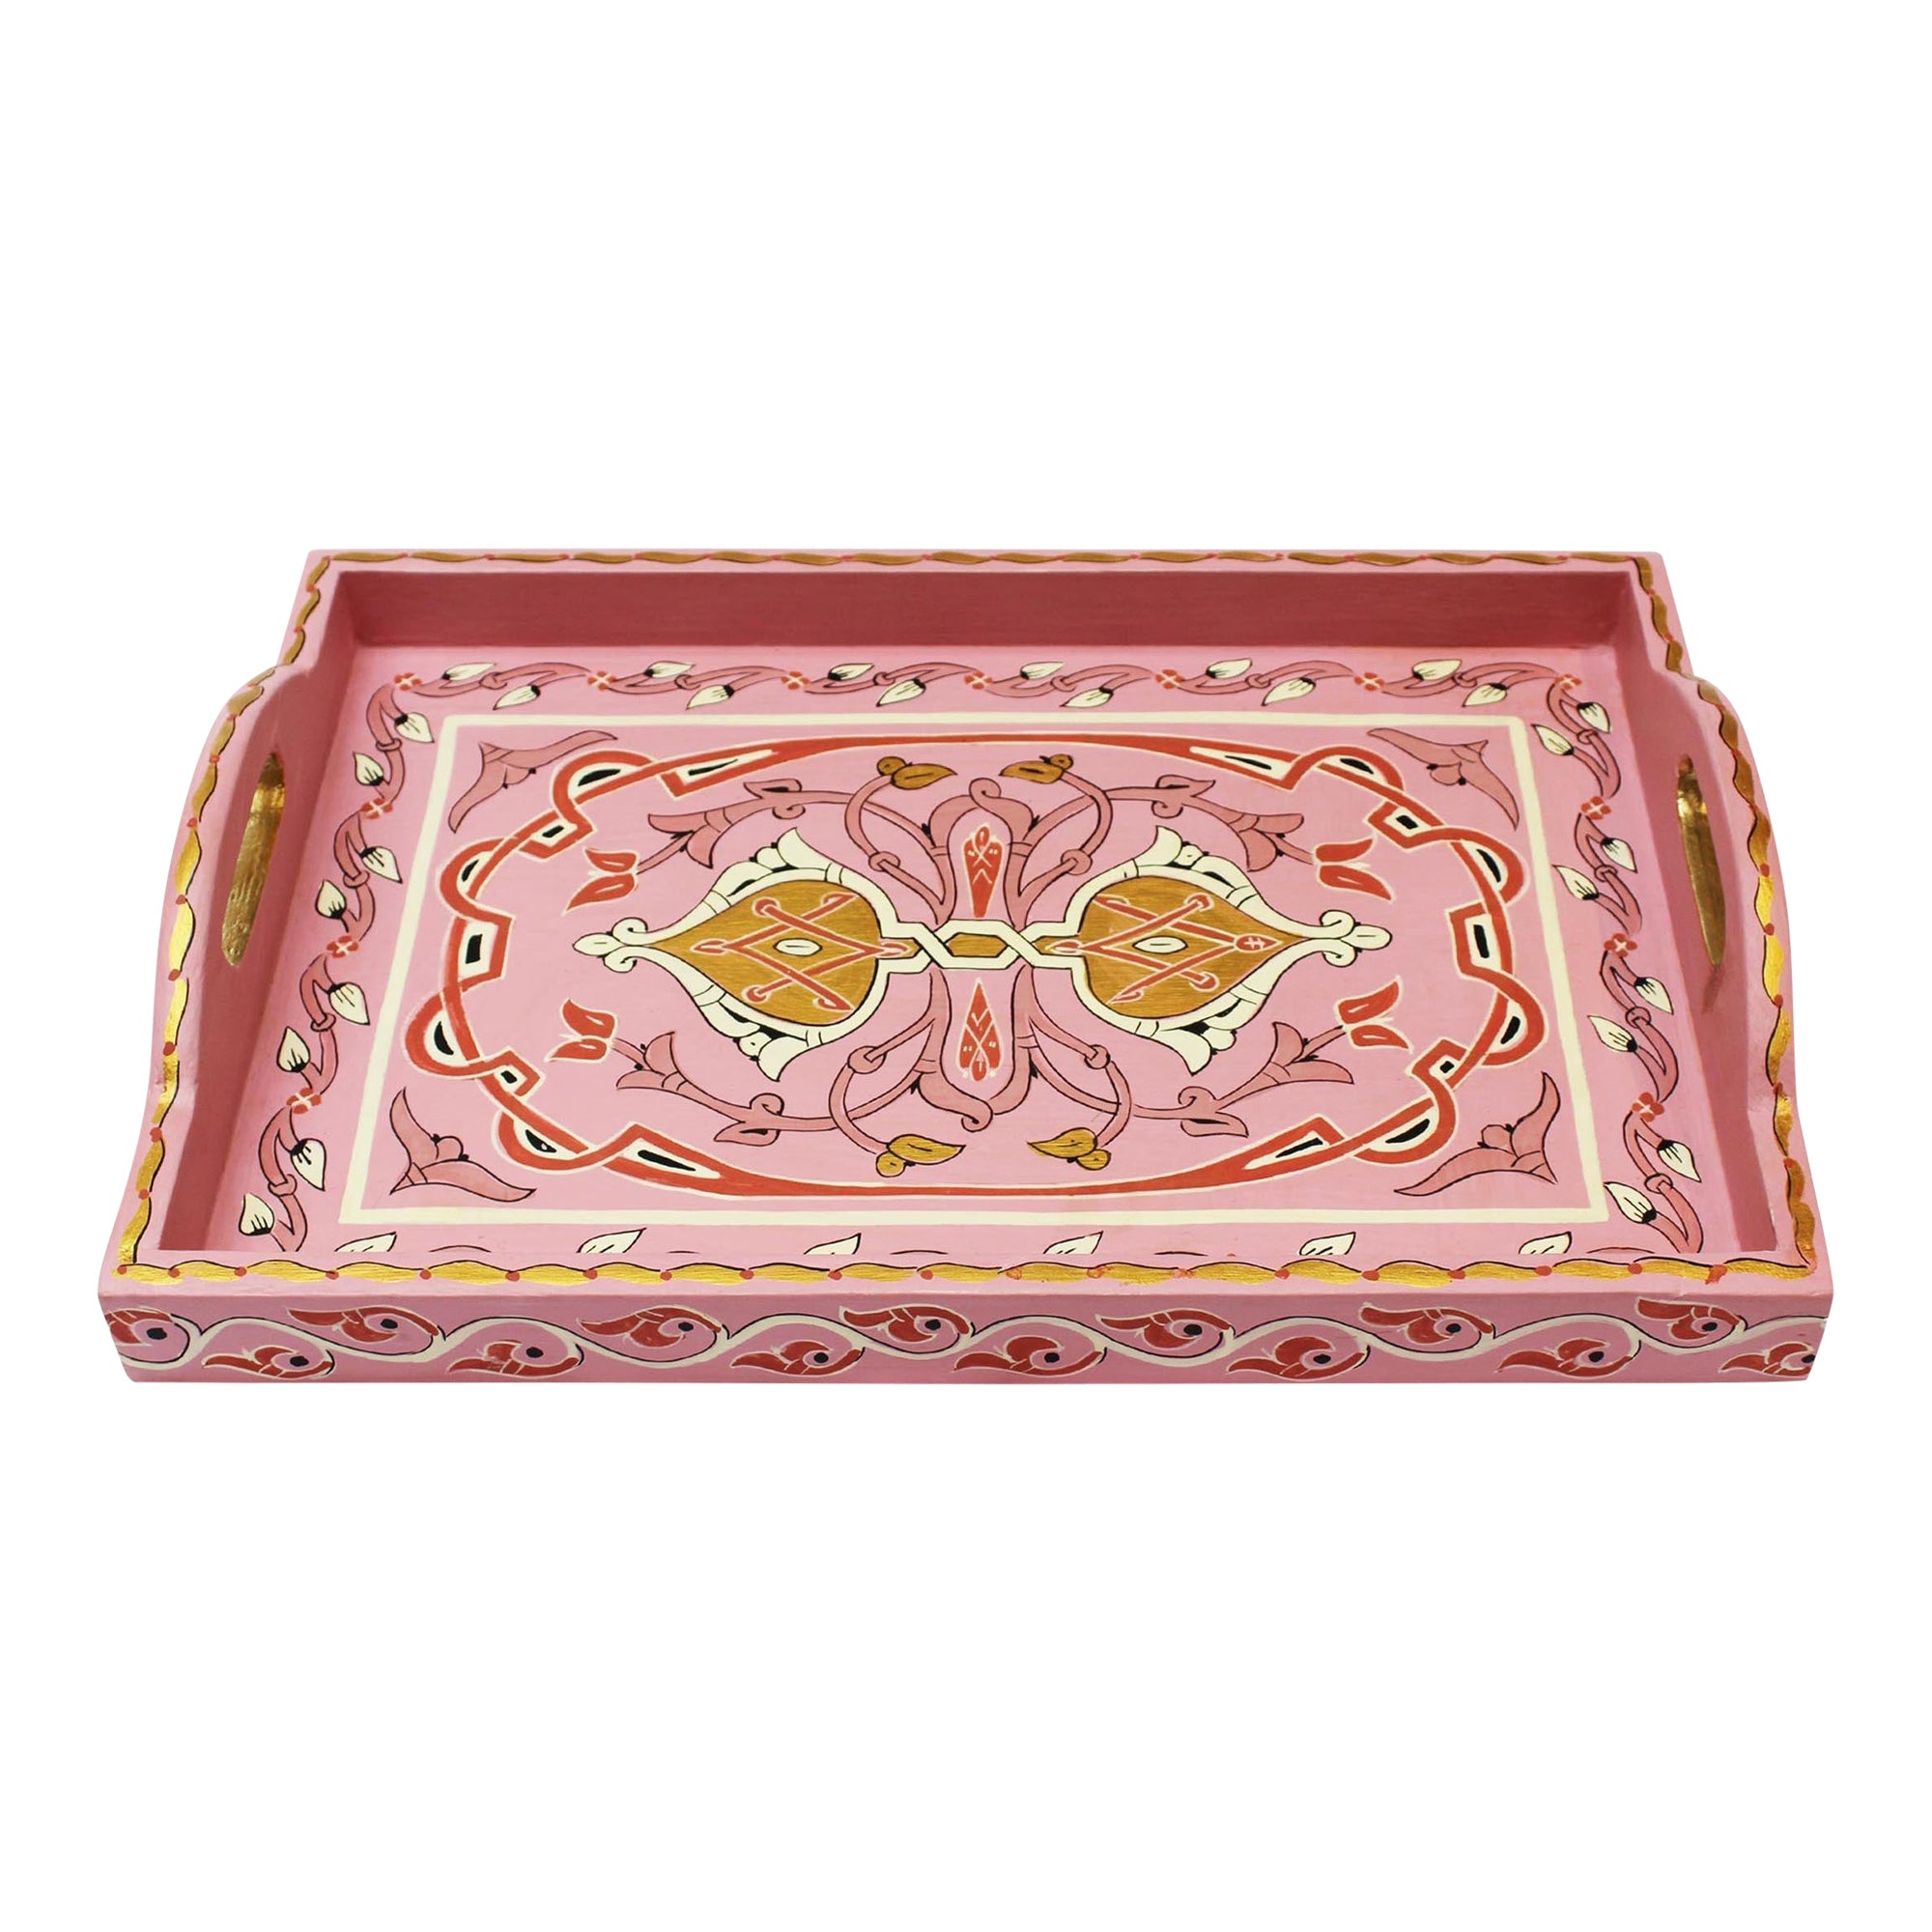 The Pink Majorelle Tray